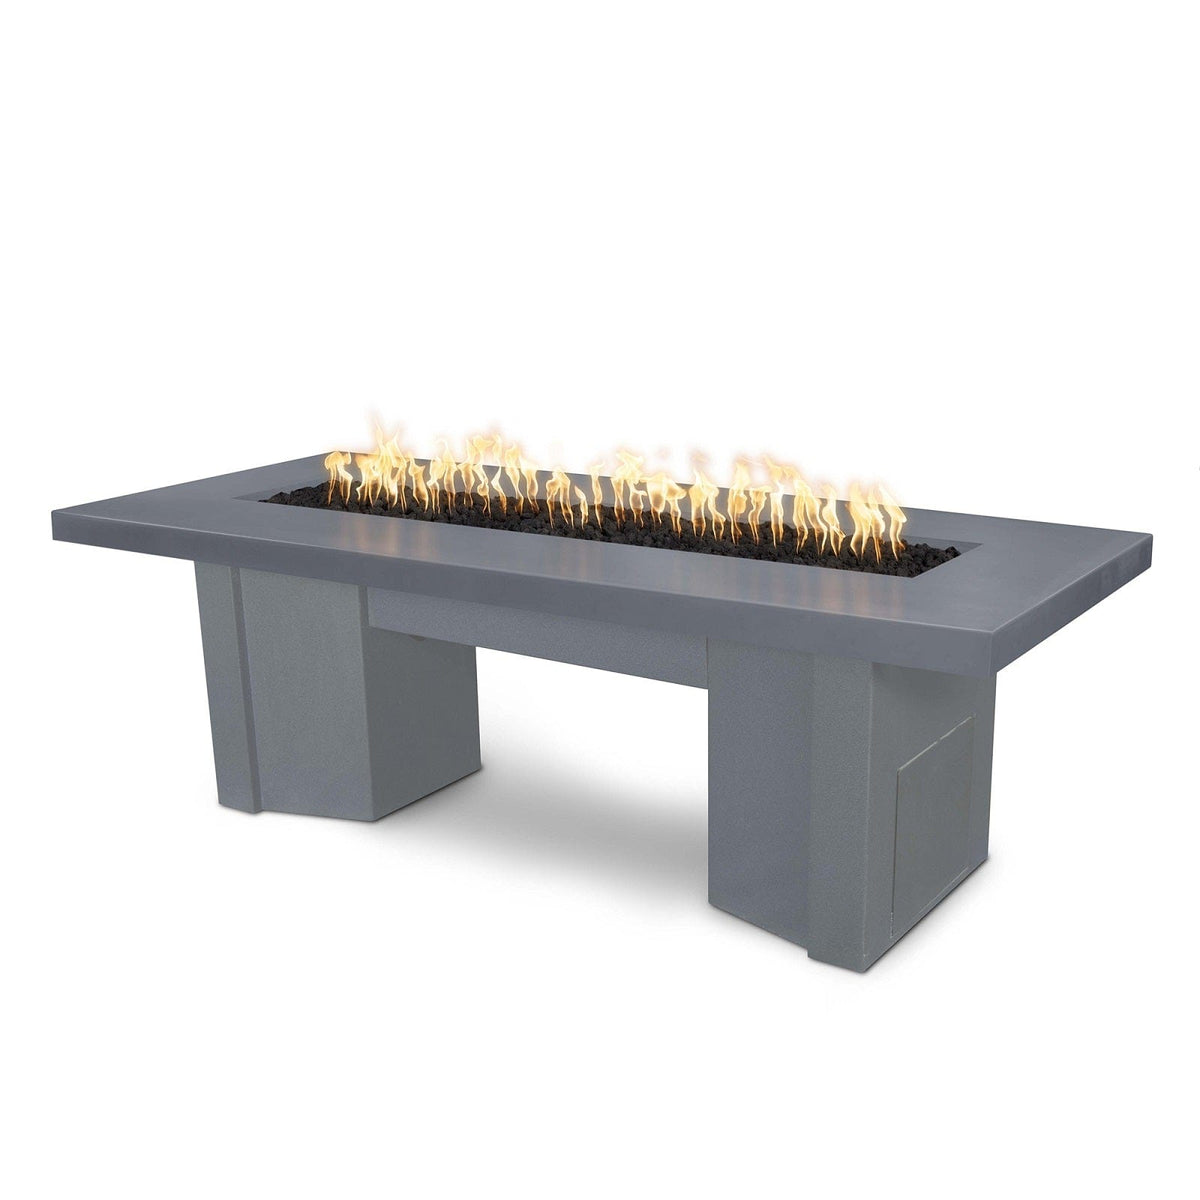 The Outdoor Plus Fire Features Gray (-GRY) / Gray Powder Coated Steel (-GRY) The Outdoor Plus 78&quot; Alameda Fire Table Smooth Concrete in Natural Gas - Flame Sense System with Push Button Spark Igniter / OPT-ALMGFRC78FSEN-NG